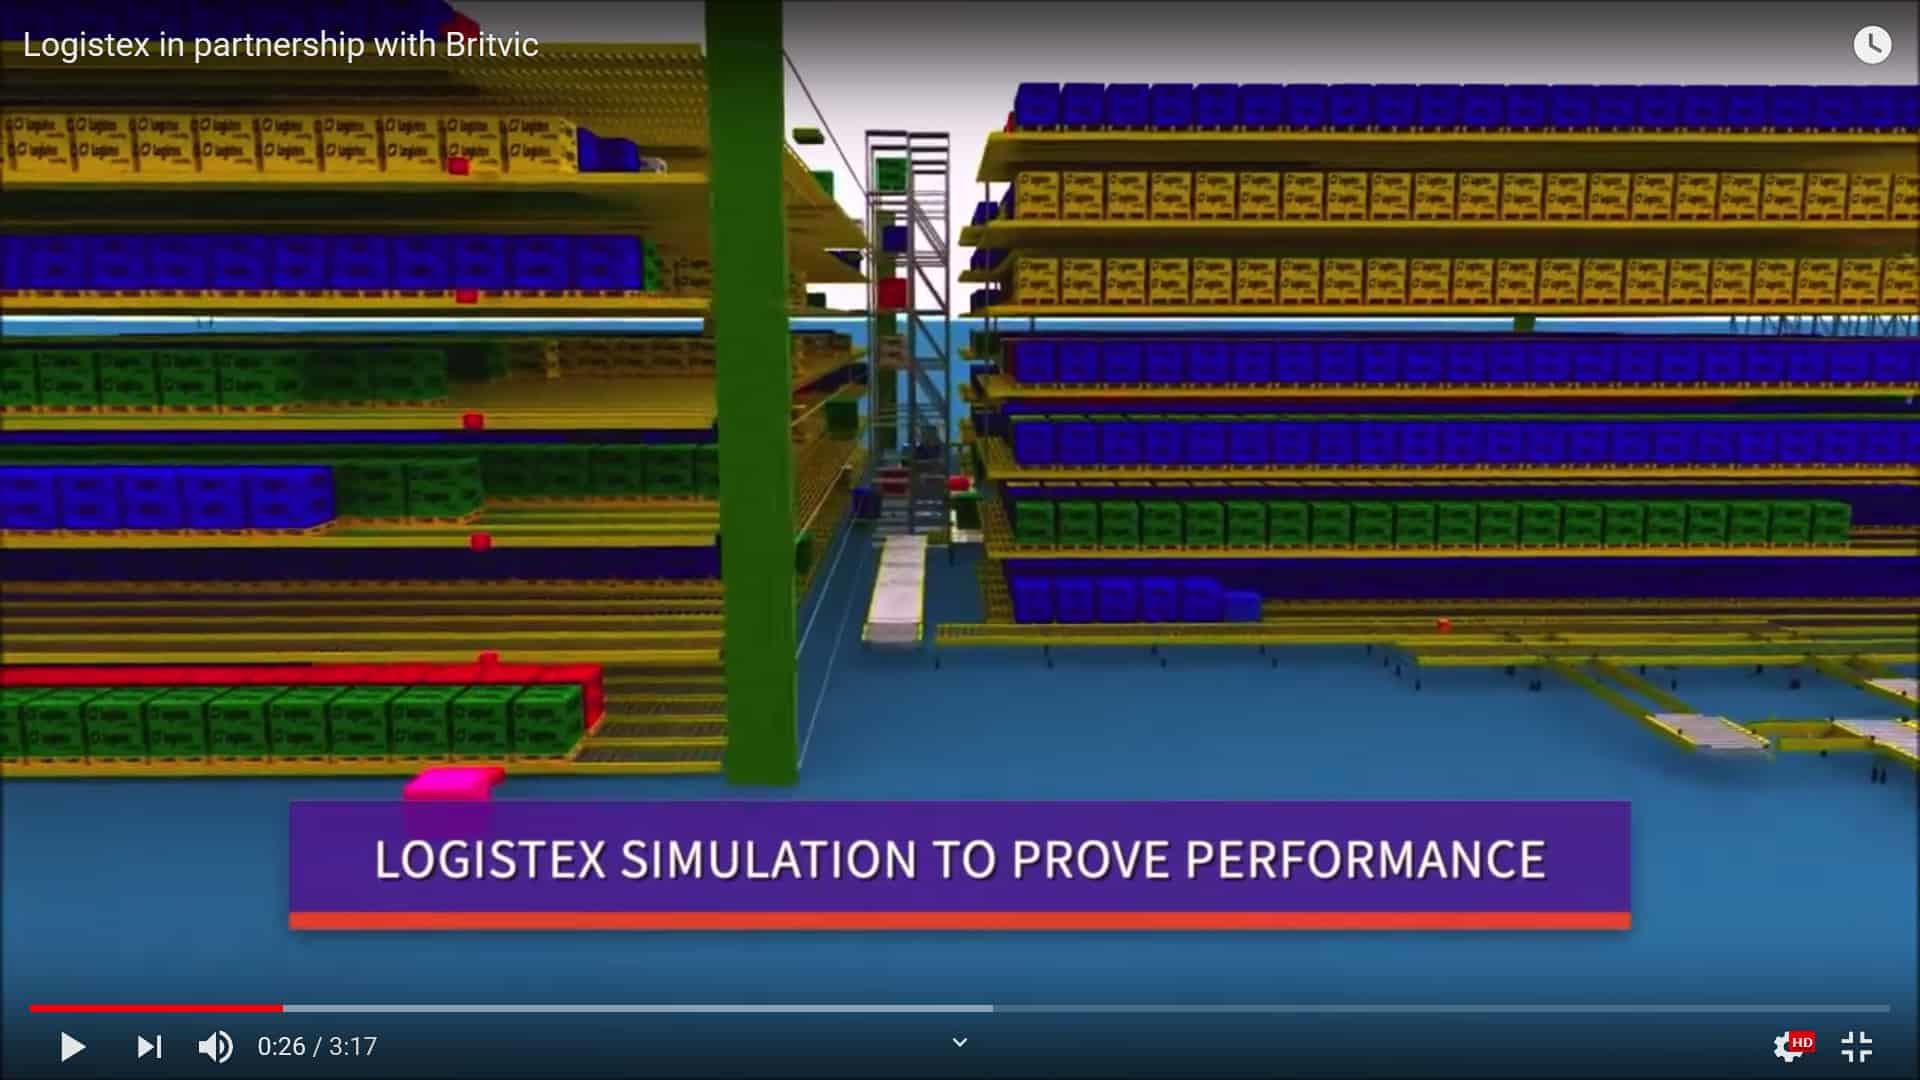 Emulate 3D – extract from Logistex YouTube video